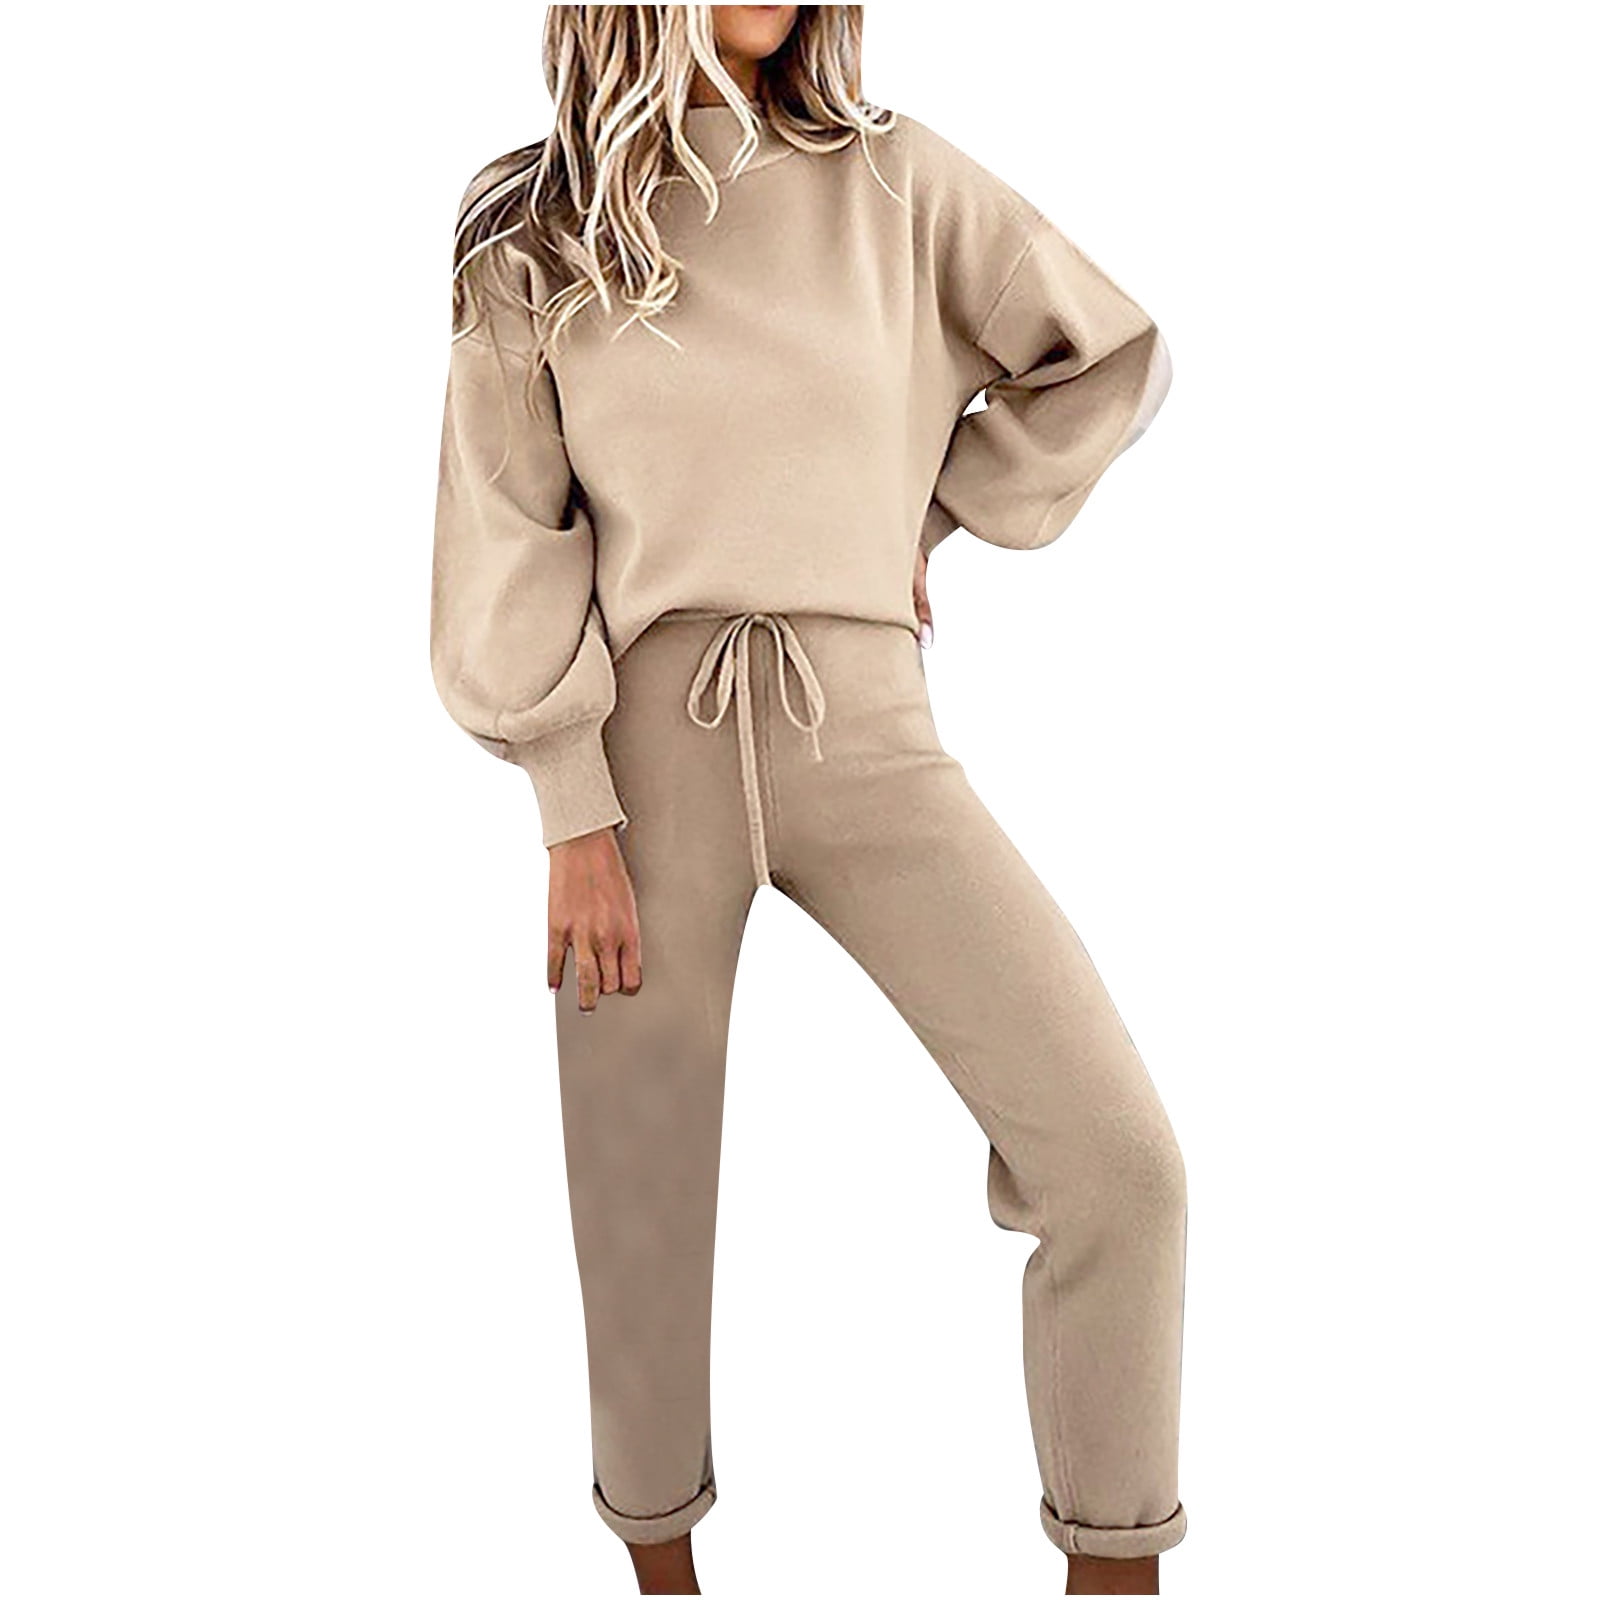 Buy Sweatsuits for Women Set 2 Piece Outfits Pullover Long Sleeve Hoodies  Jogging Suits Sweatpants Lounge Tracksuit with Pocket, 37-gray, XX-Large at